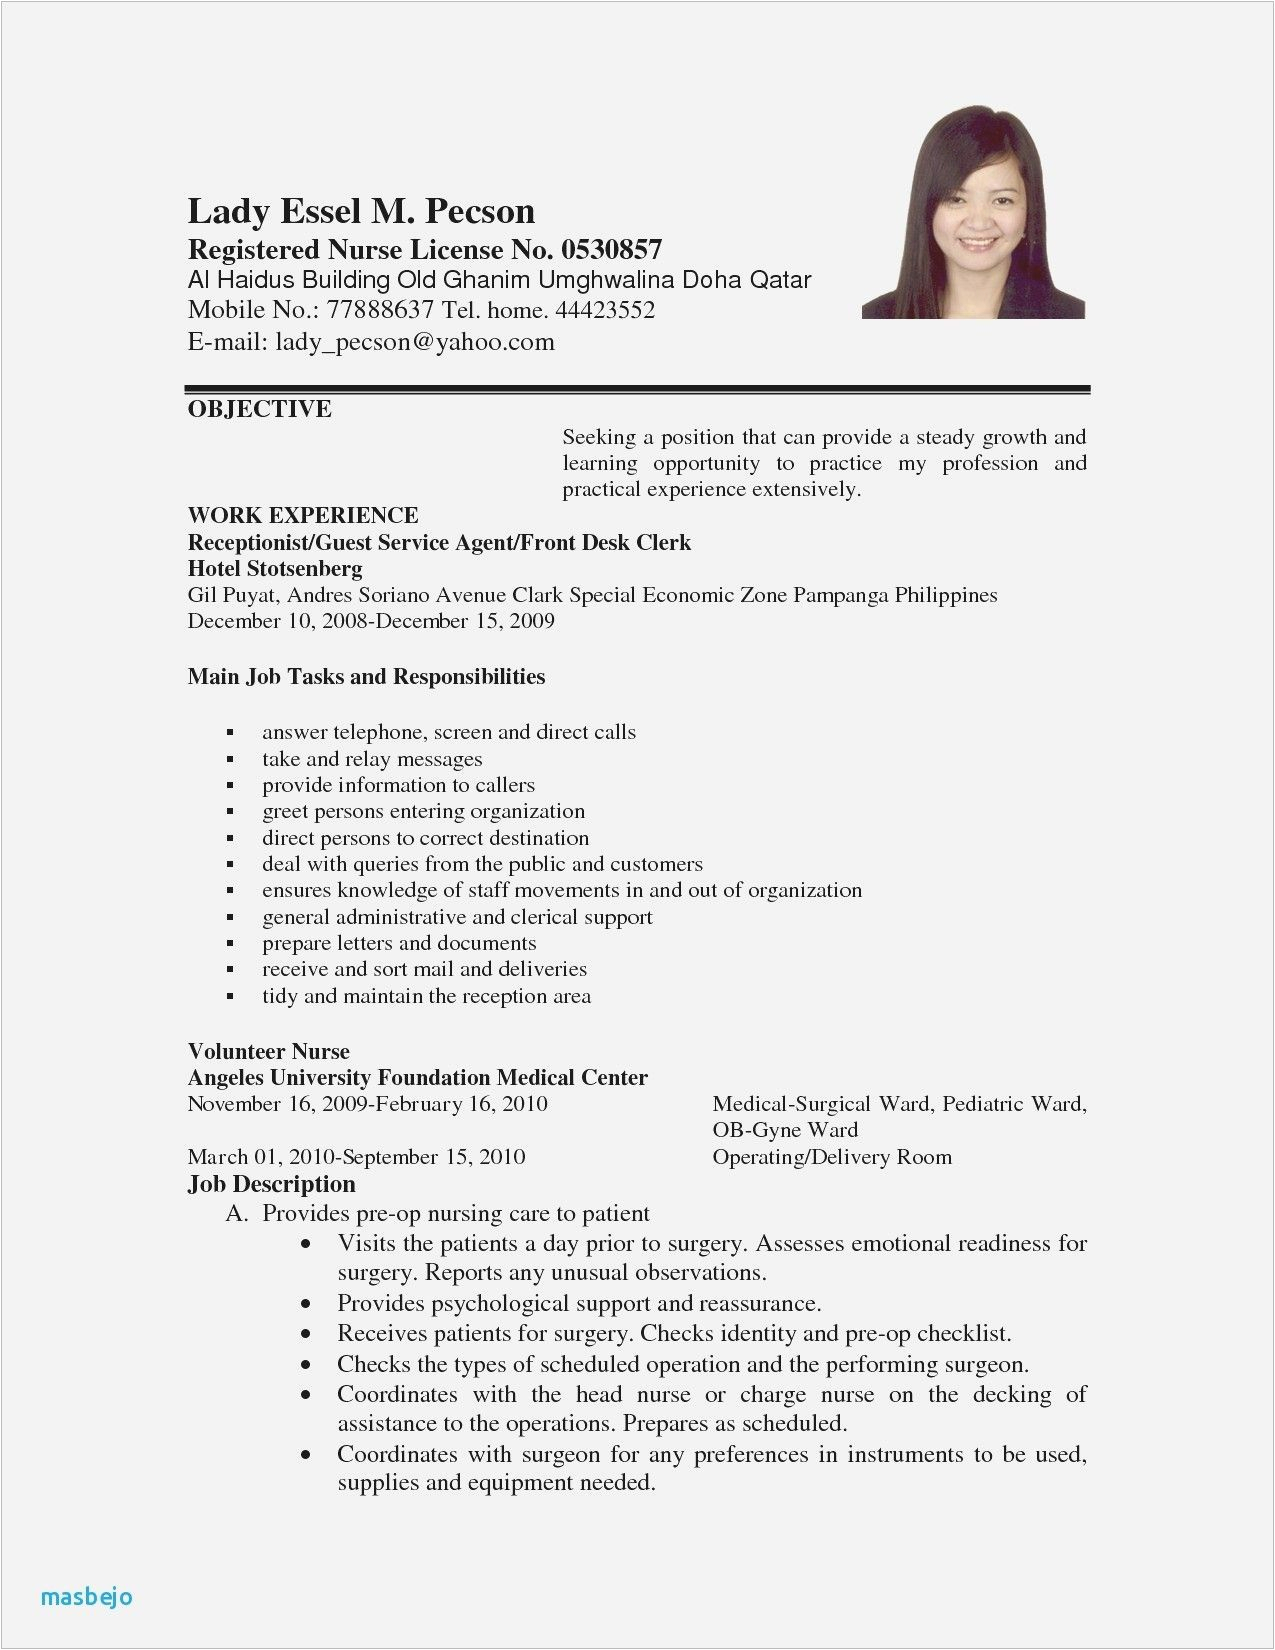 Sample Resume Philippines with Work Experience Sample Resume Puter Technician Philippines Valid